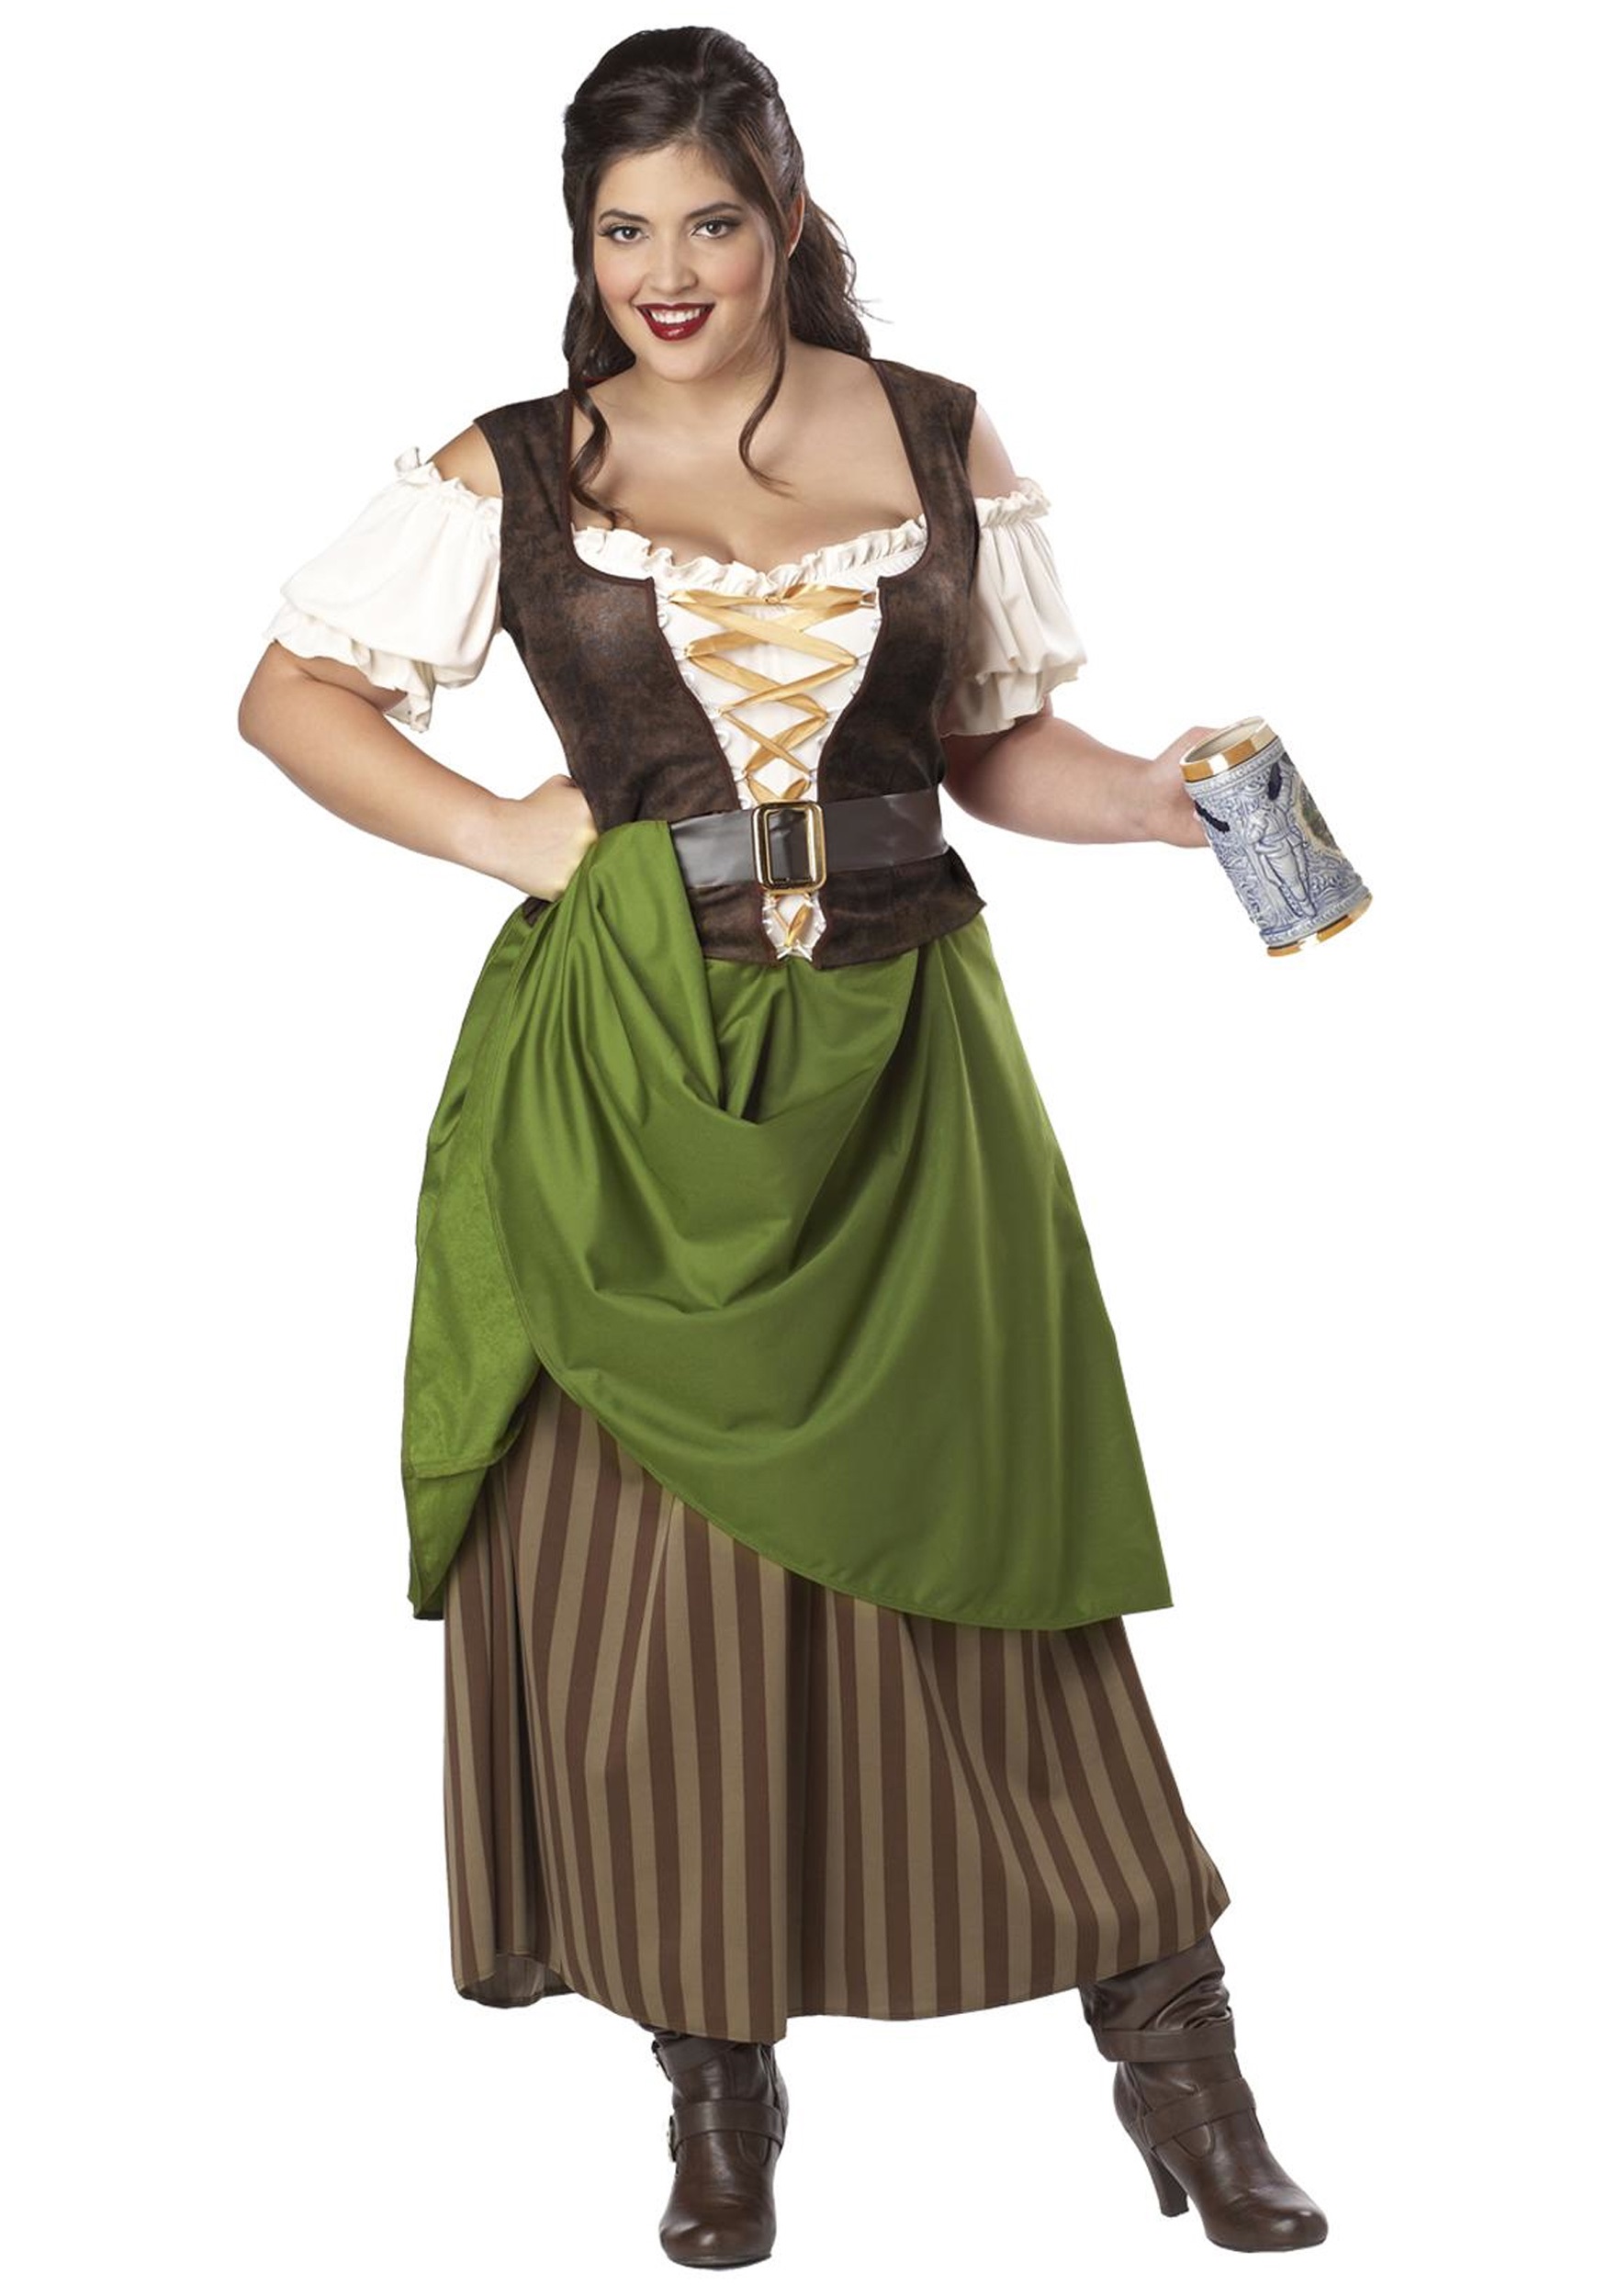 Photos - Fancy Dress California Costume Collection Tavern Maiden Plus Size  Costume